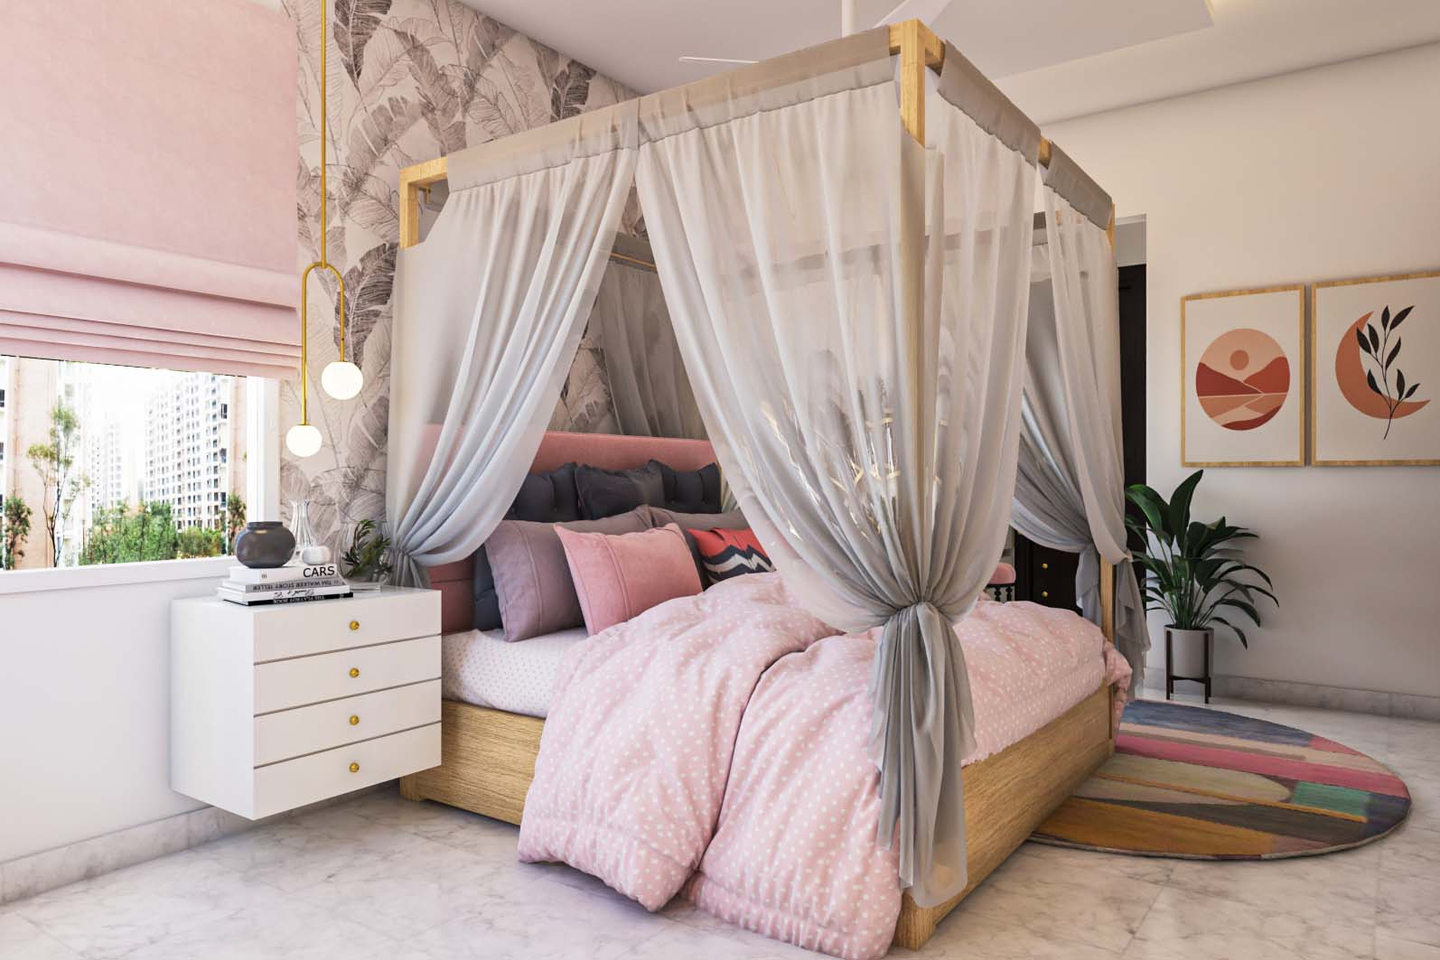 Kid's Bedroom Design with Canopy Bed - Livspace